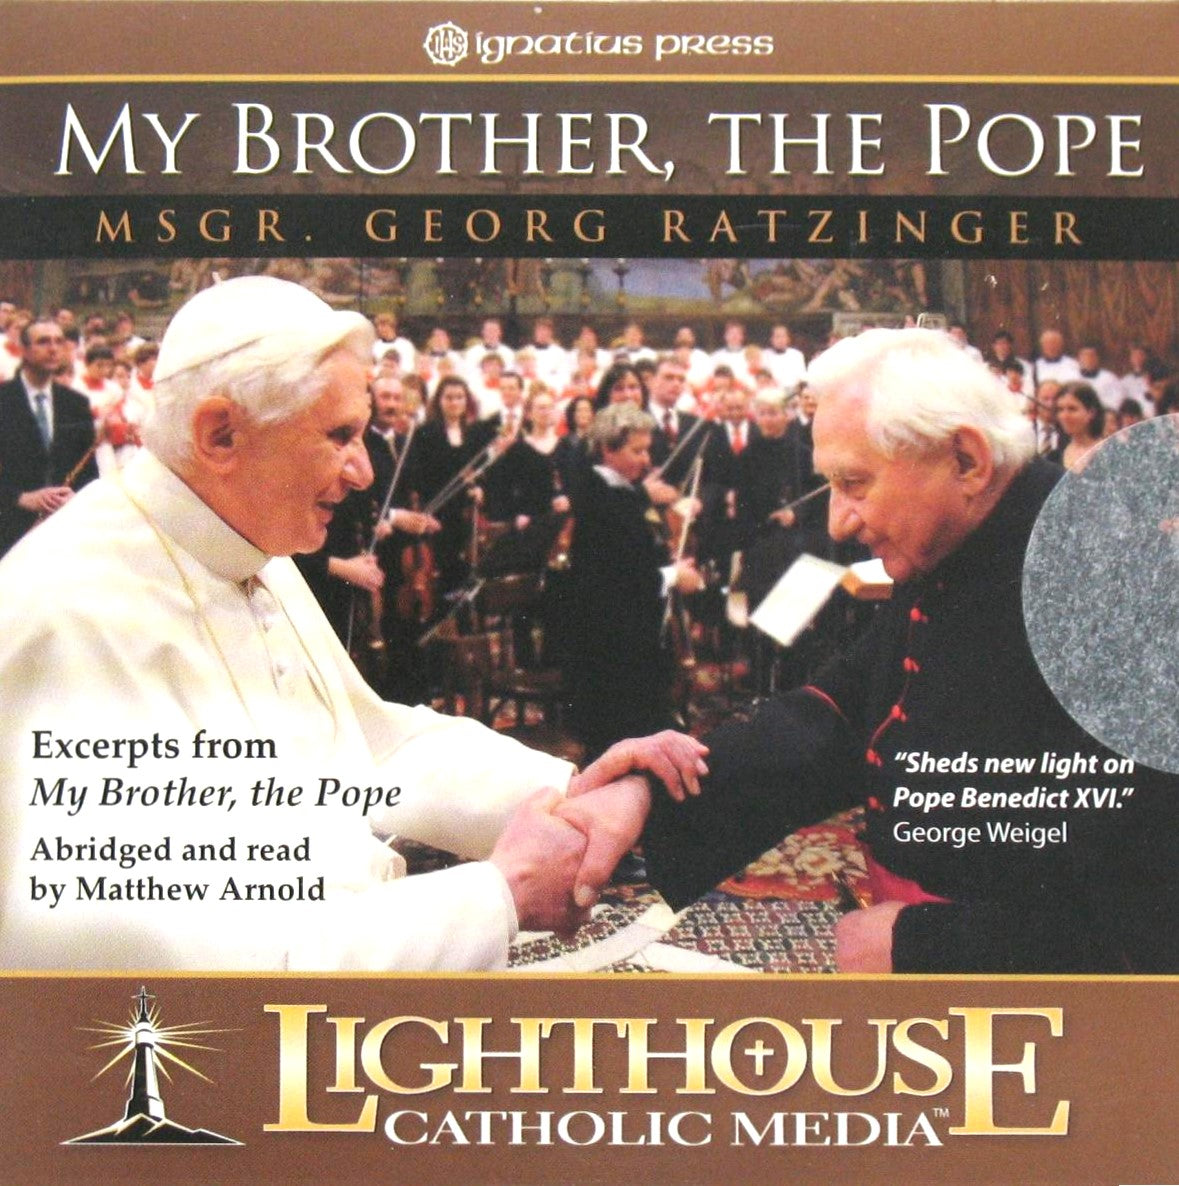 My Brother, The Pope by Msgr. Georg Ratzinger - Excerpts from the Book  - Abridged - CD